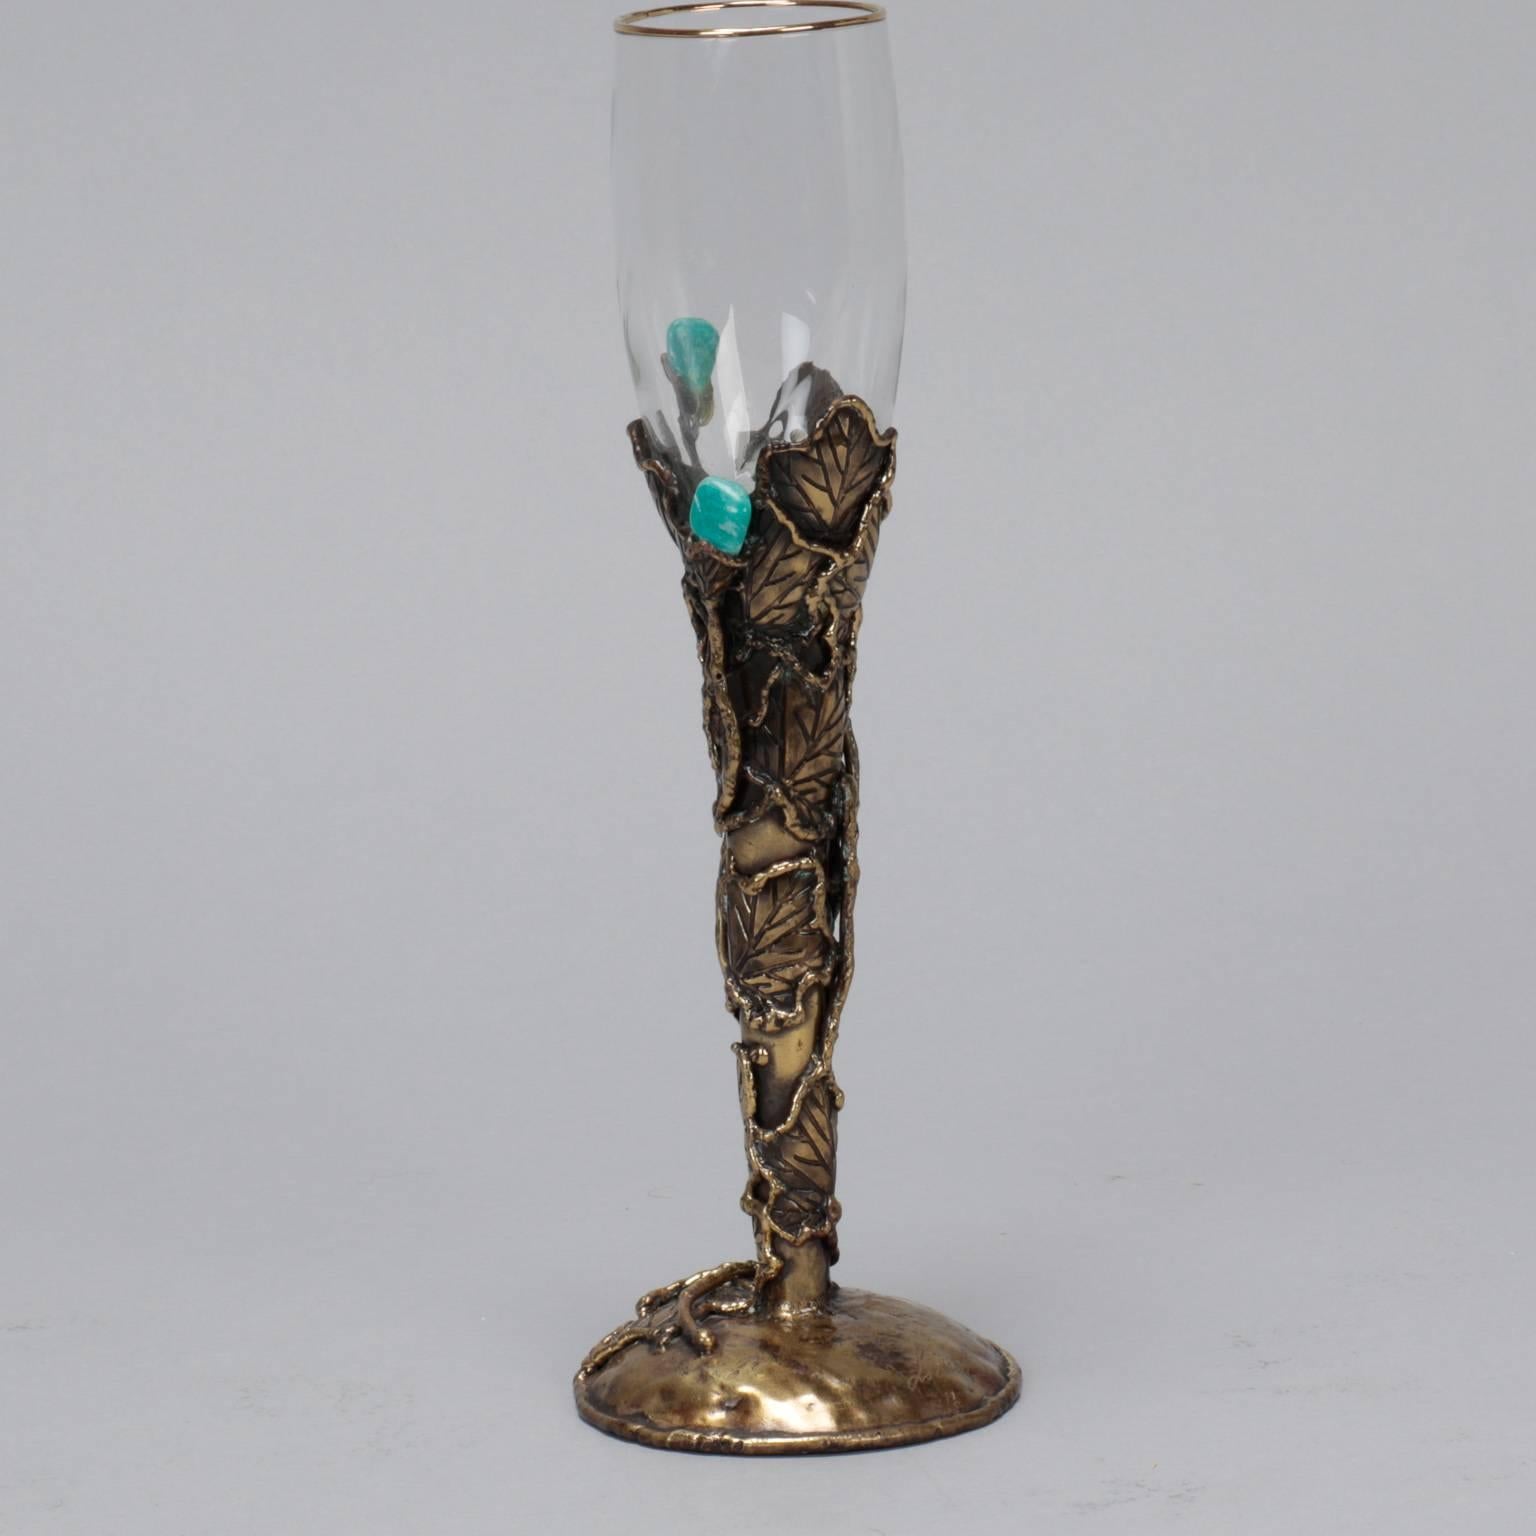 Italian Mid-Century Artisan Signed Wine Glass with Metal Surround and Turquoise Stones 